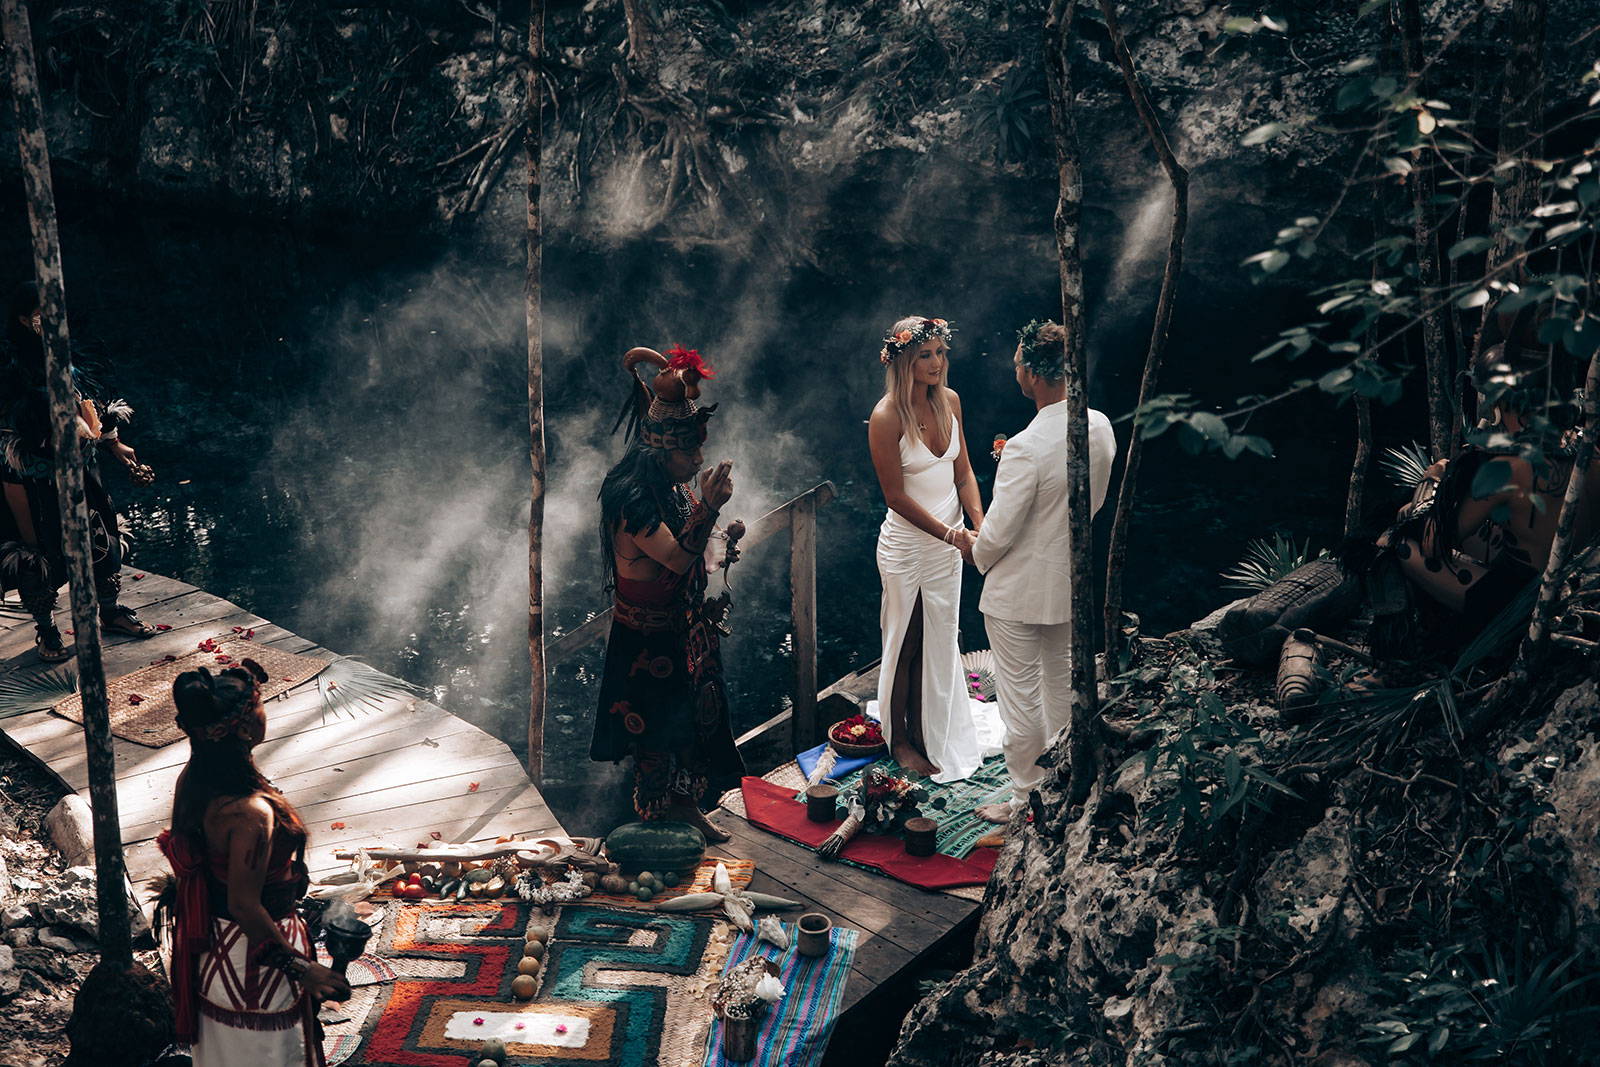 Bride and groom ceremony in a forest in Tulum, Mexico